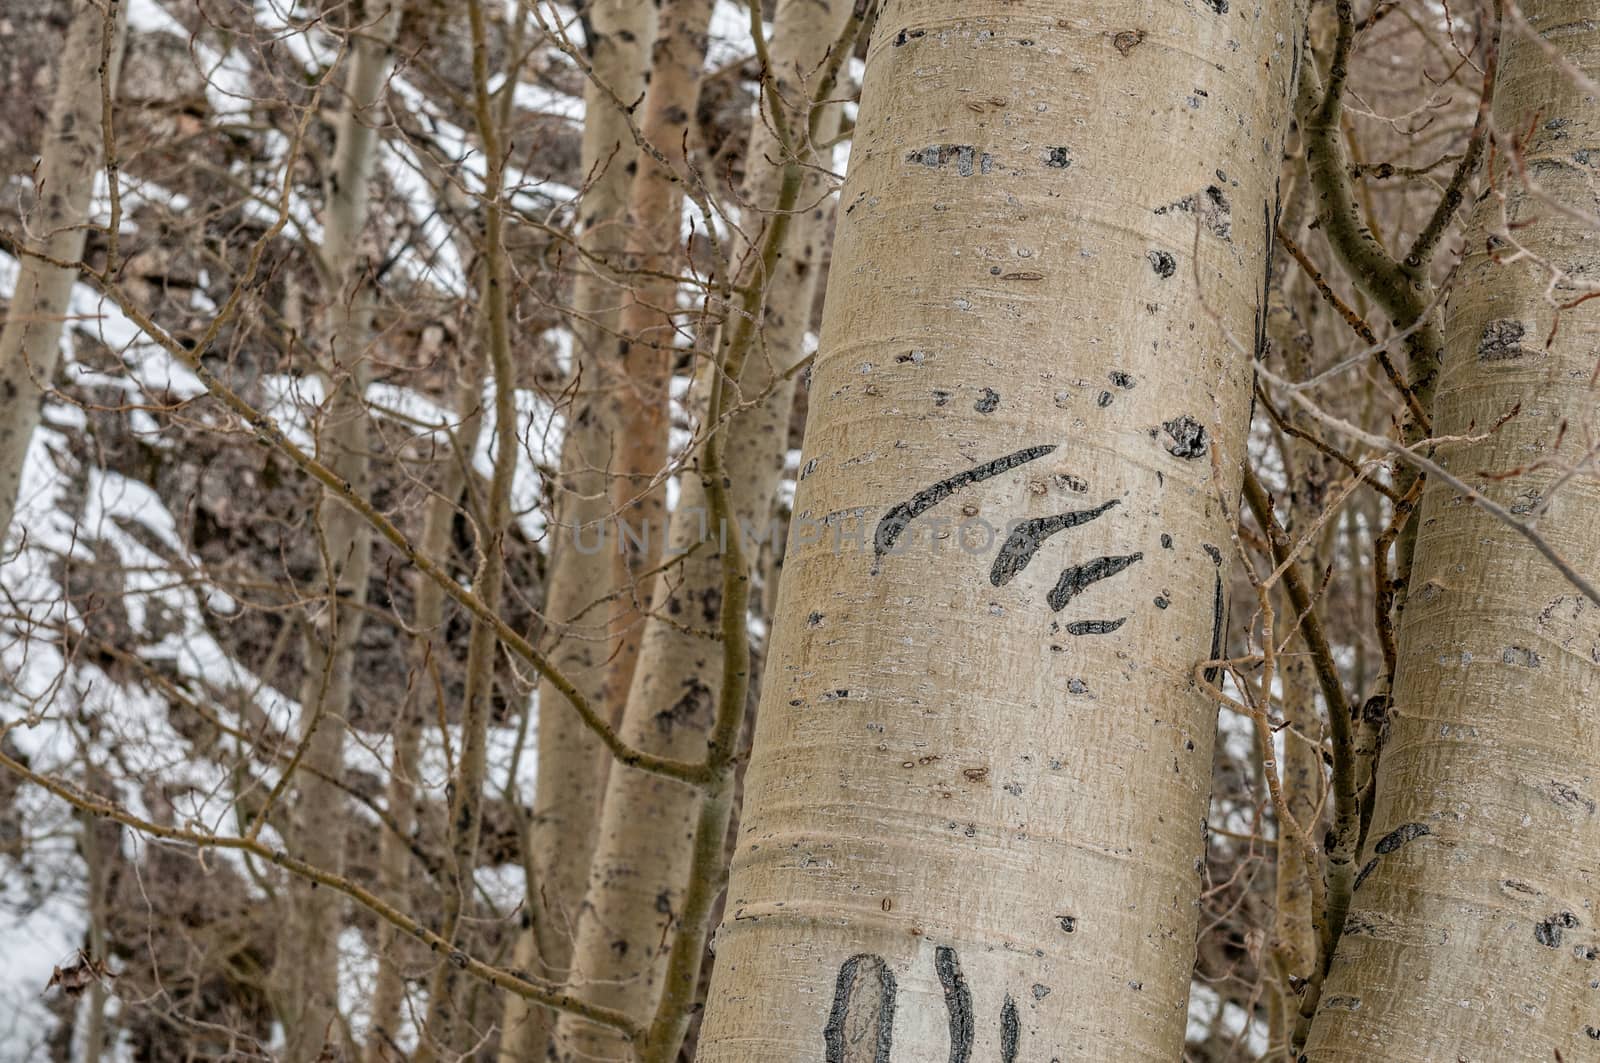 Claw marks on a tree made by a bear, June Lake Loop, Sierras, California by Njean